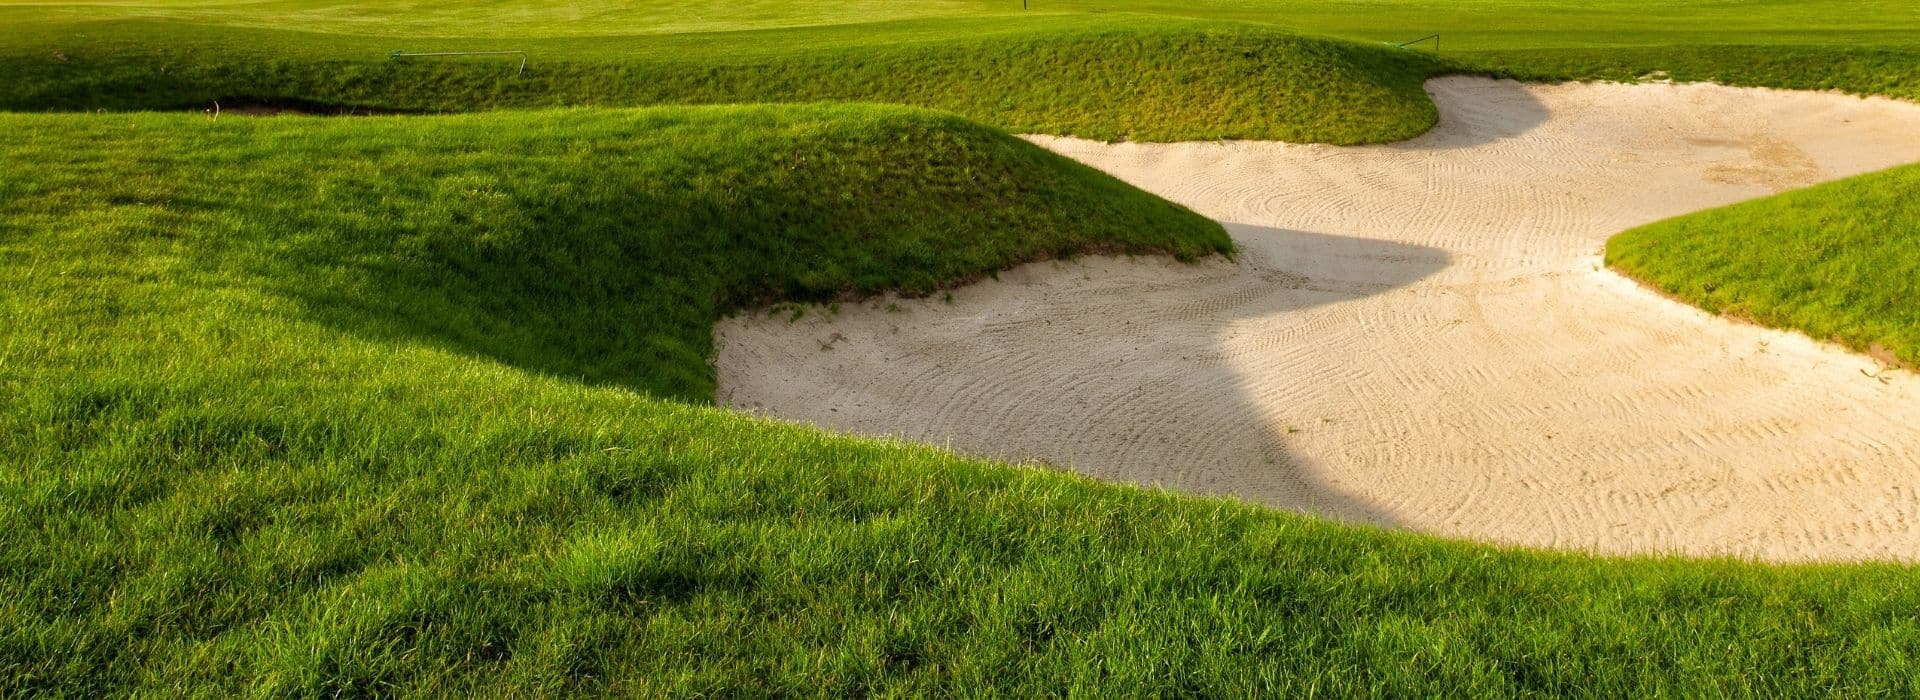 Sandy bunker surrounded by green grass on a golf course